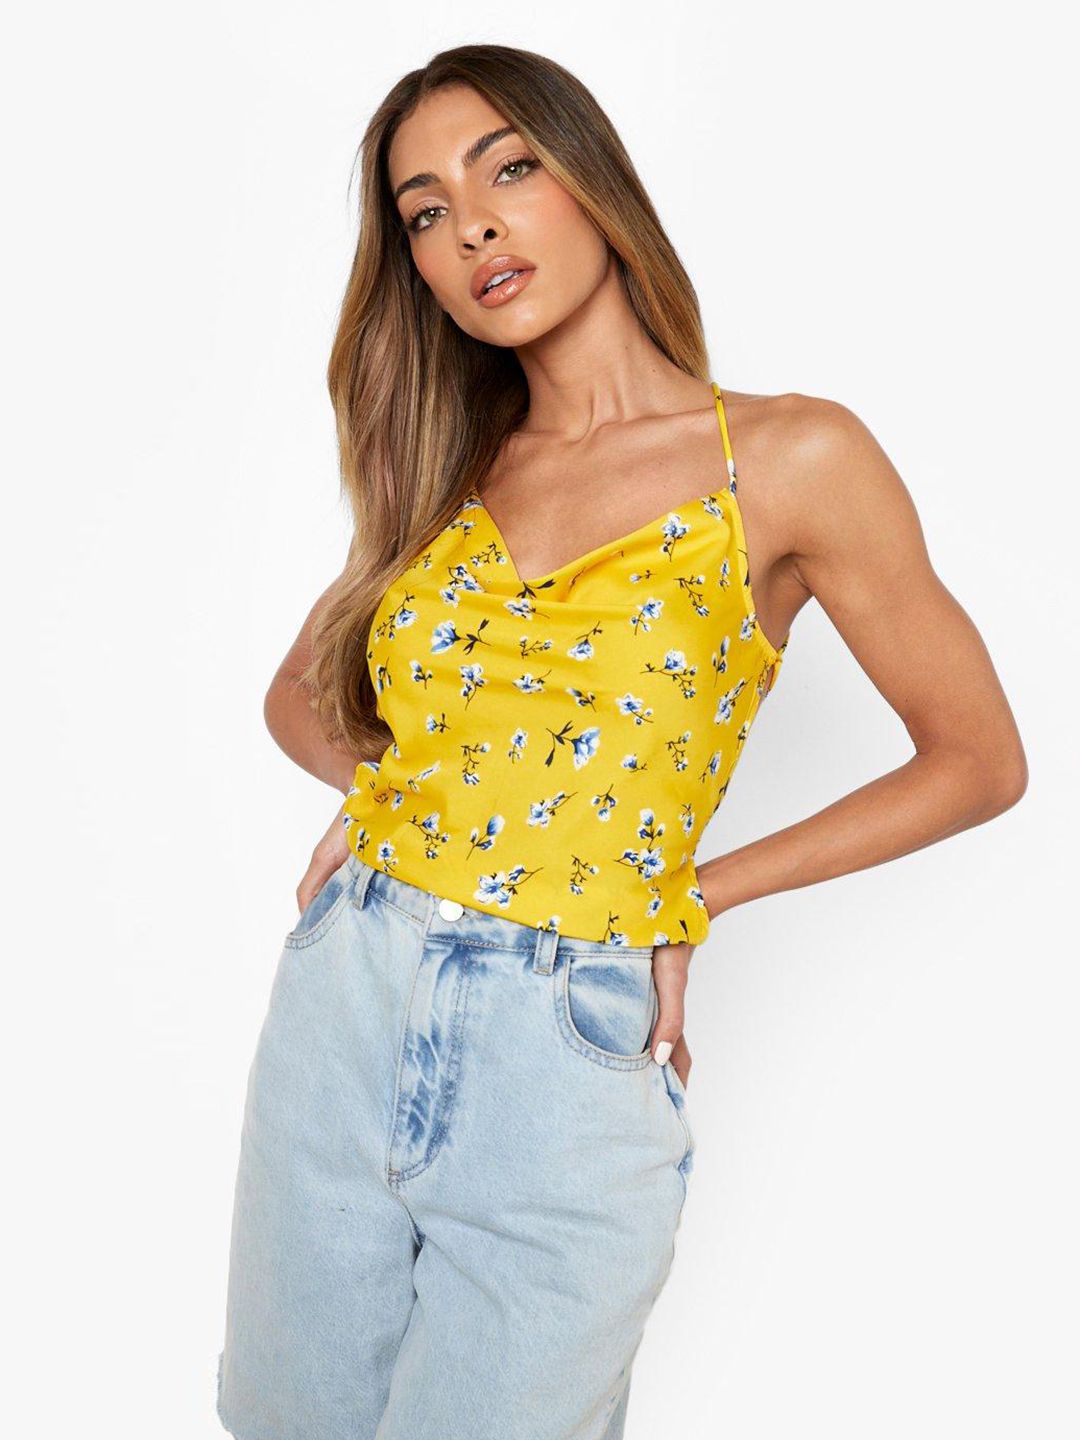 Boohoo Floral Print Backless Crop Top Price in India